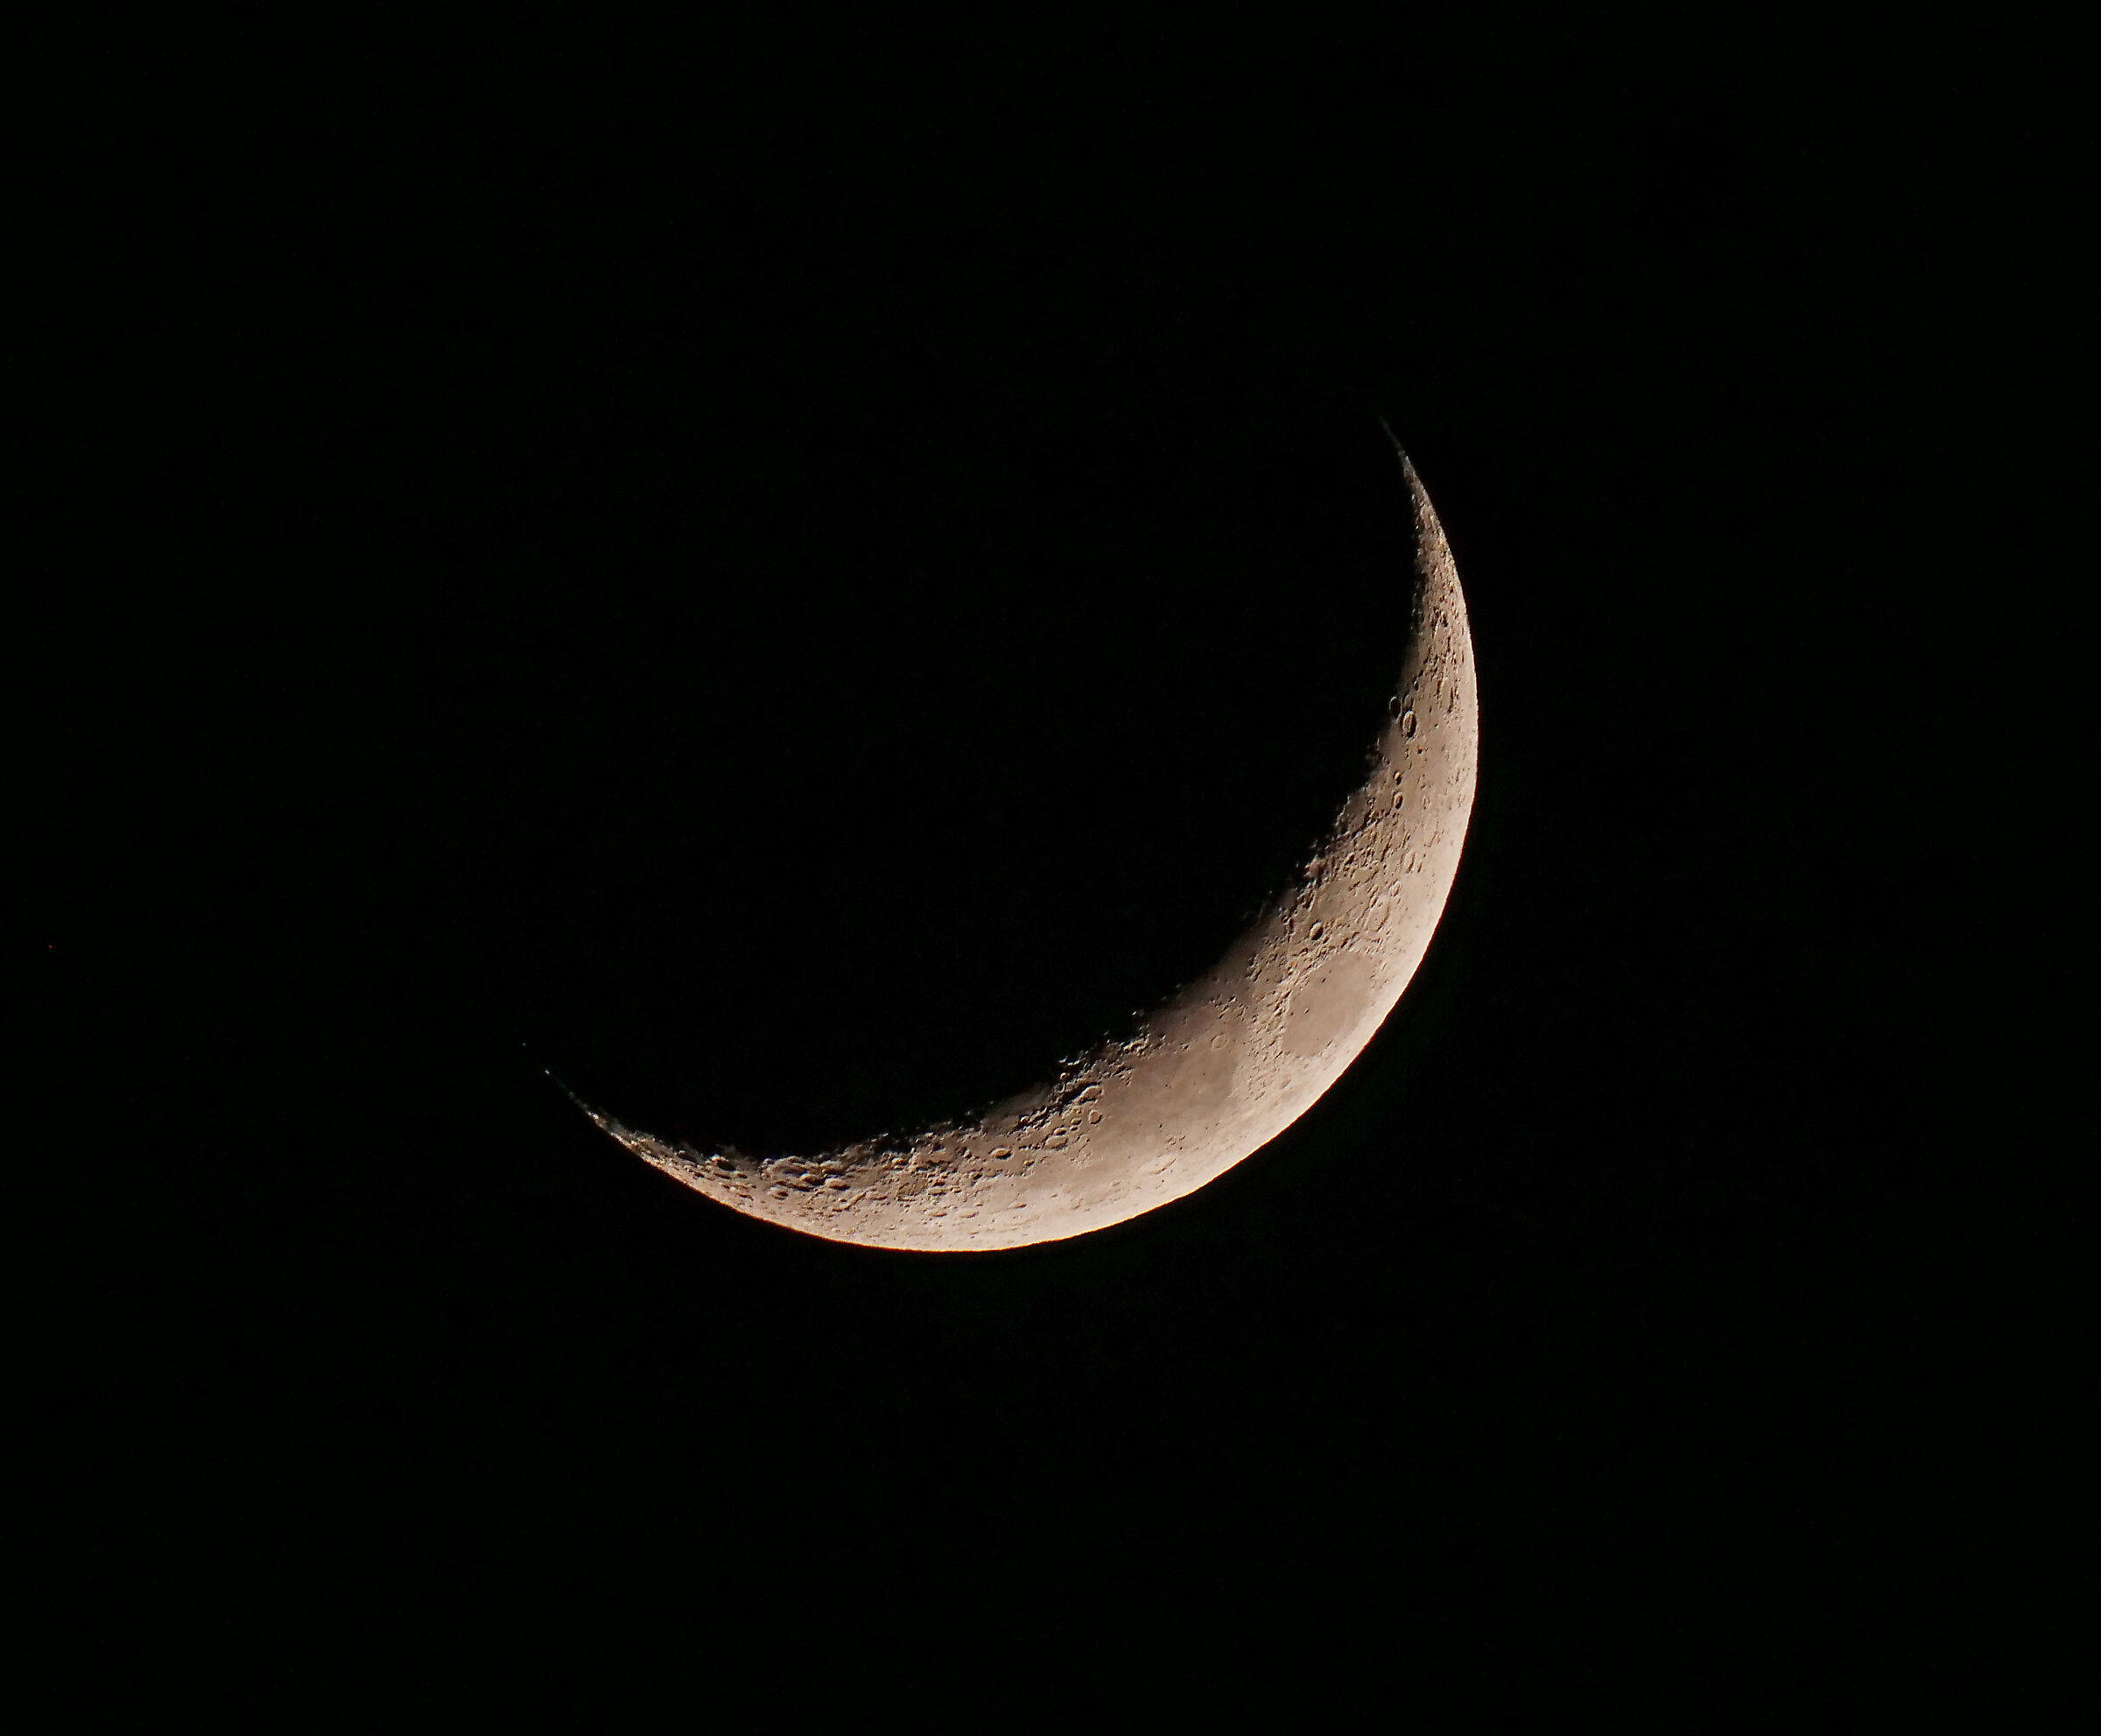 Today's 4-day moon at 17%...